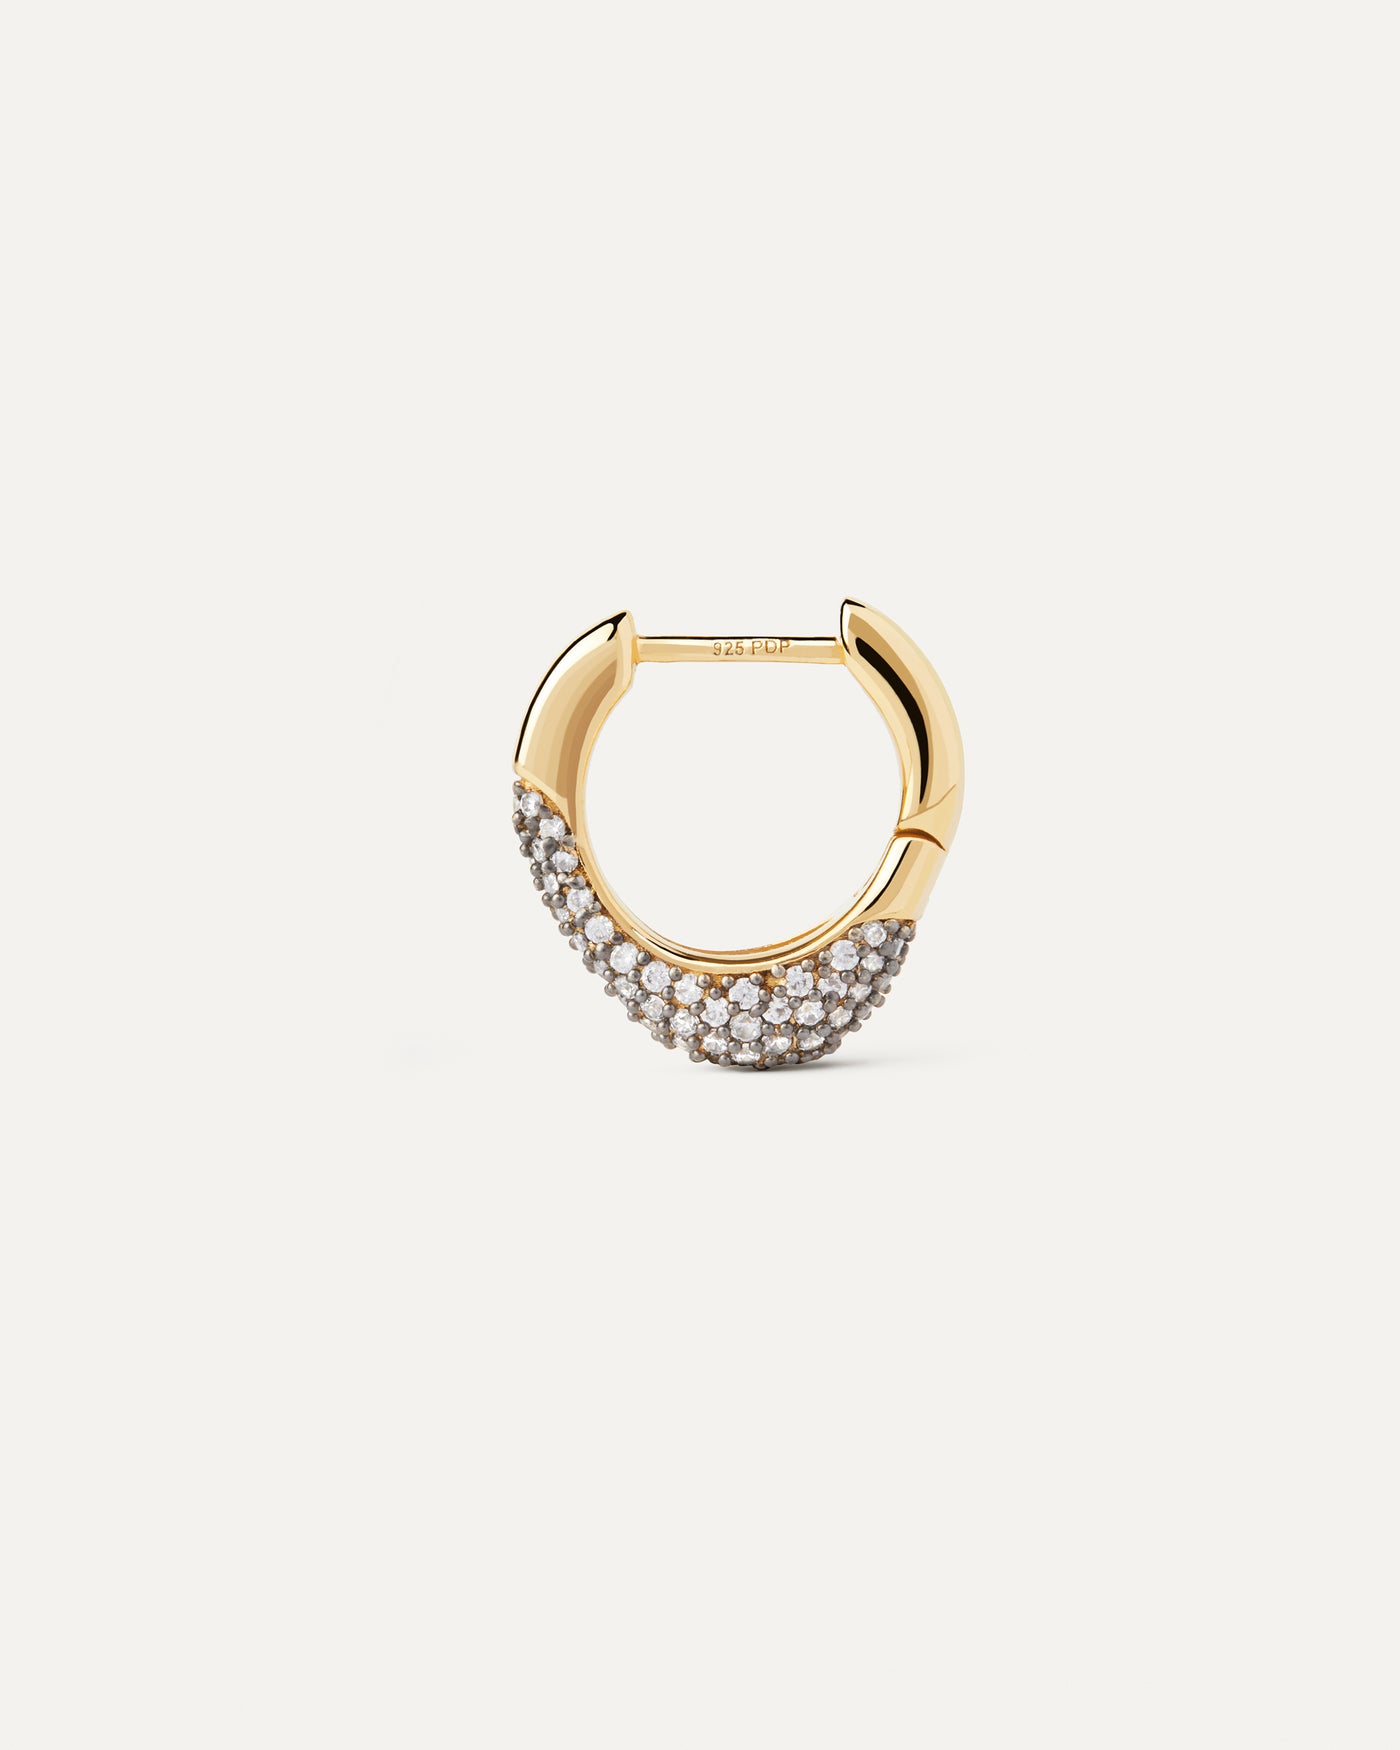 2023 Selection | Pavé Duna Single Hoop. Gold-plated organic shape single hoop with cubic zirconia pavé. Get the latest arrival from PDPAOLA. Place your order safely and get this Best Seller. Free Shipping.